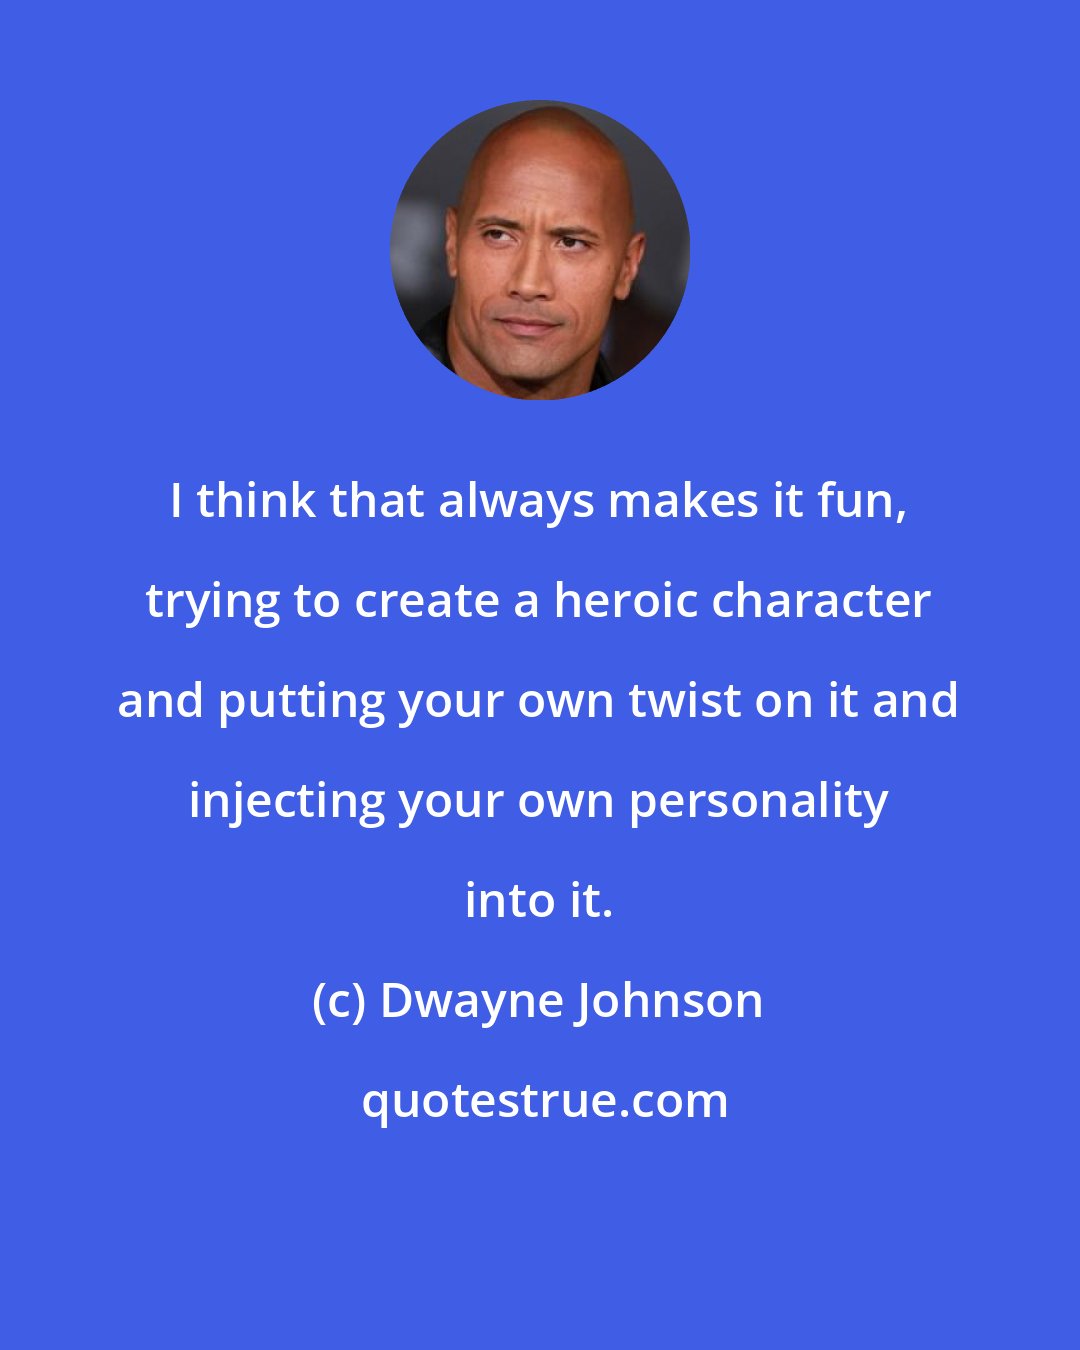 Dwayne Johnson: I think that always makes it fun, trying to create a heroic character and putting your own twist on it and injecting your own personality into it.